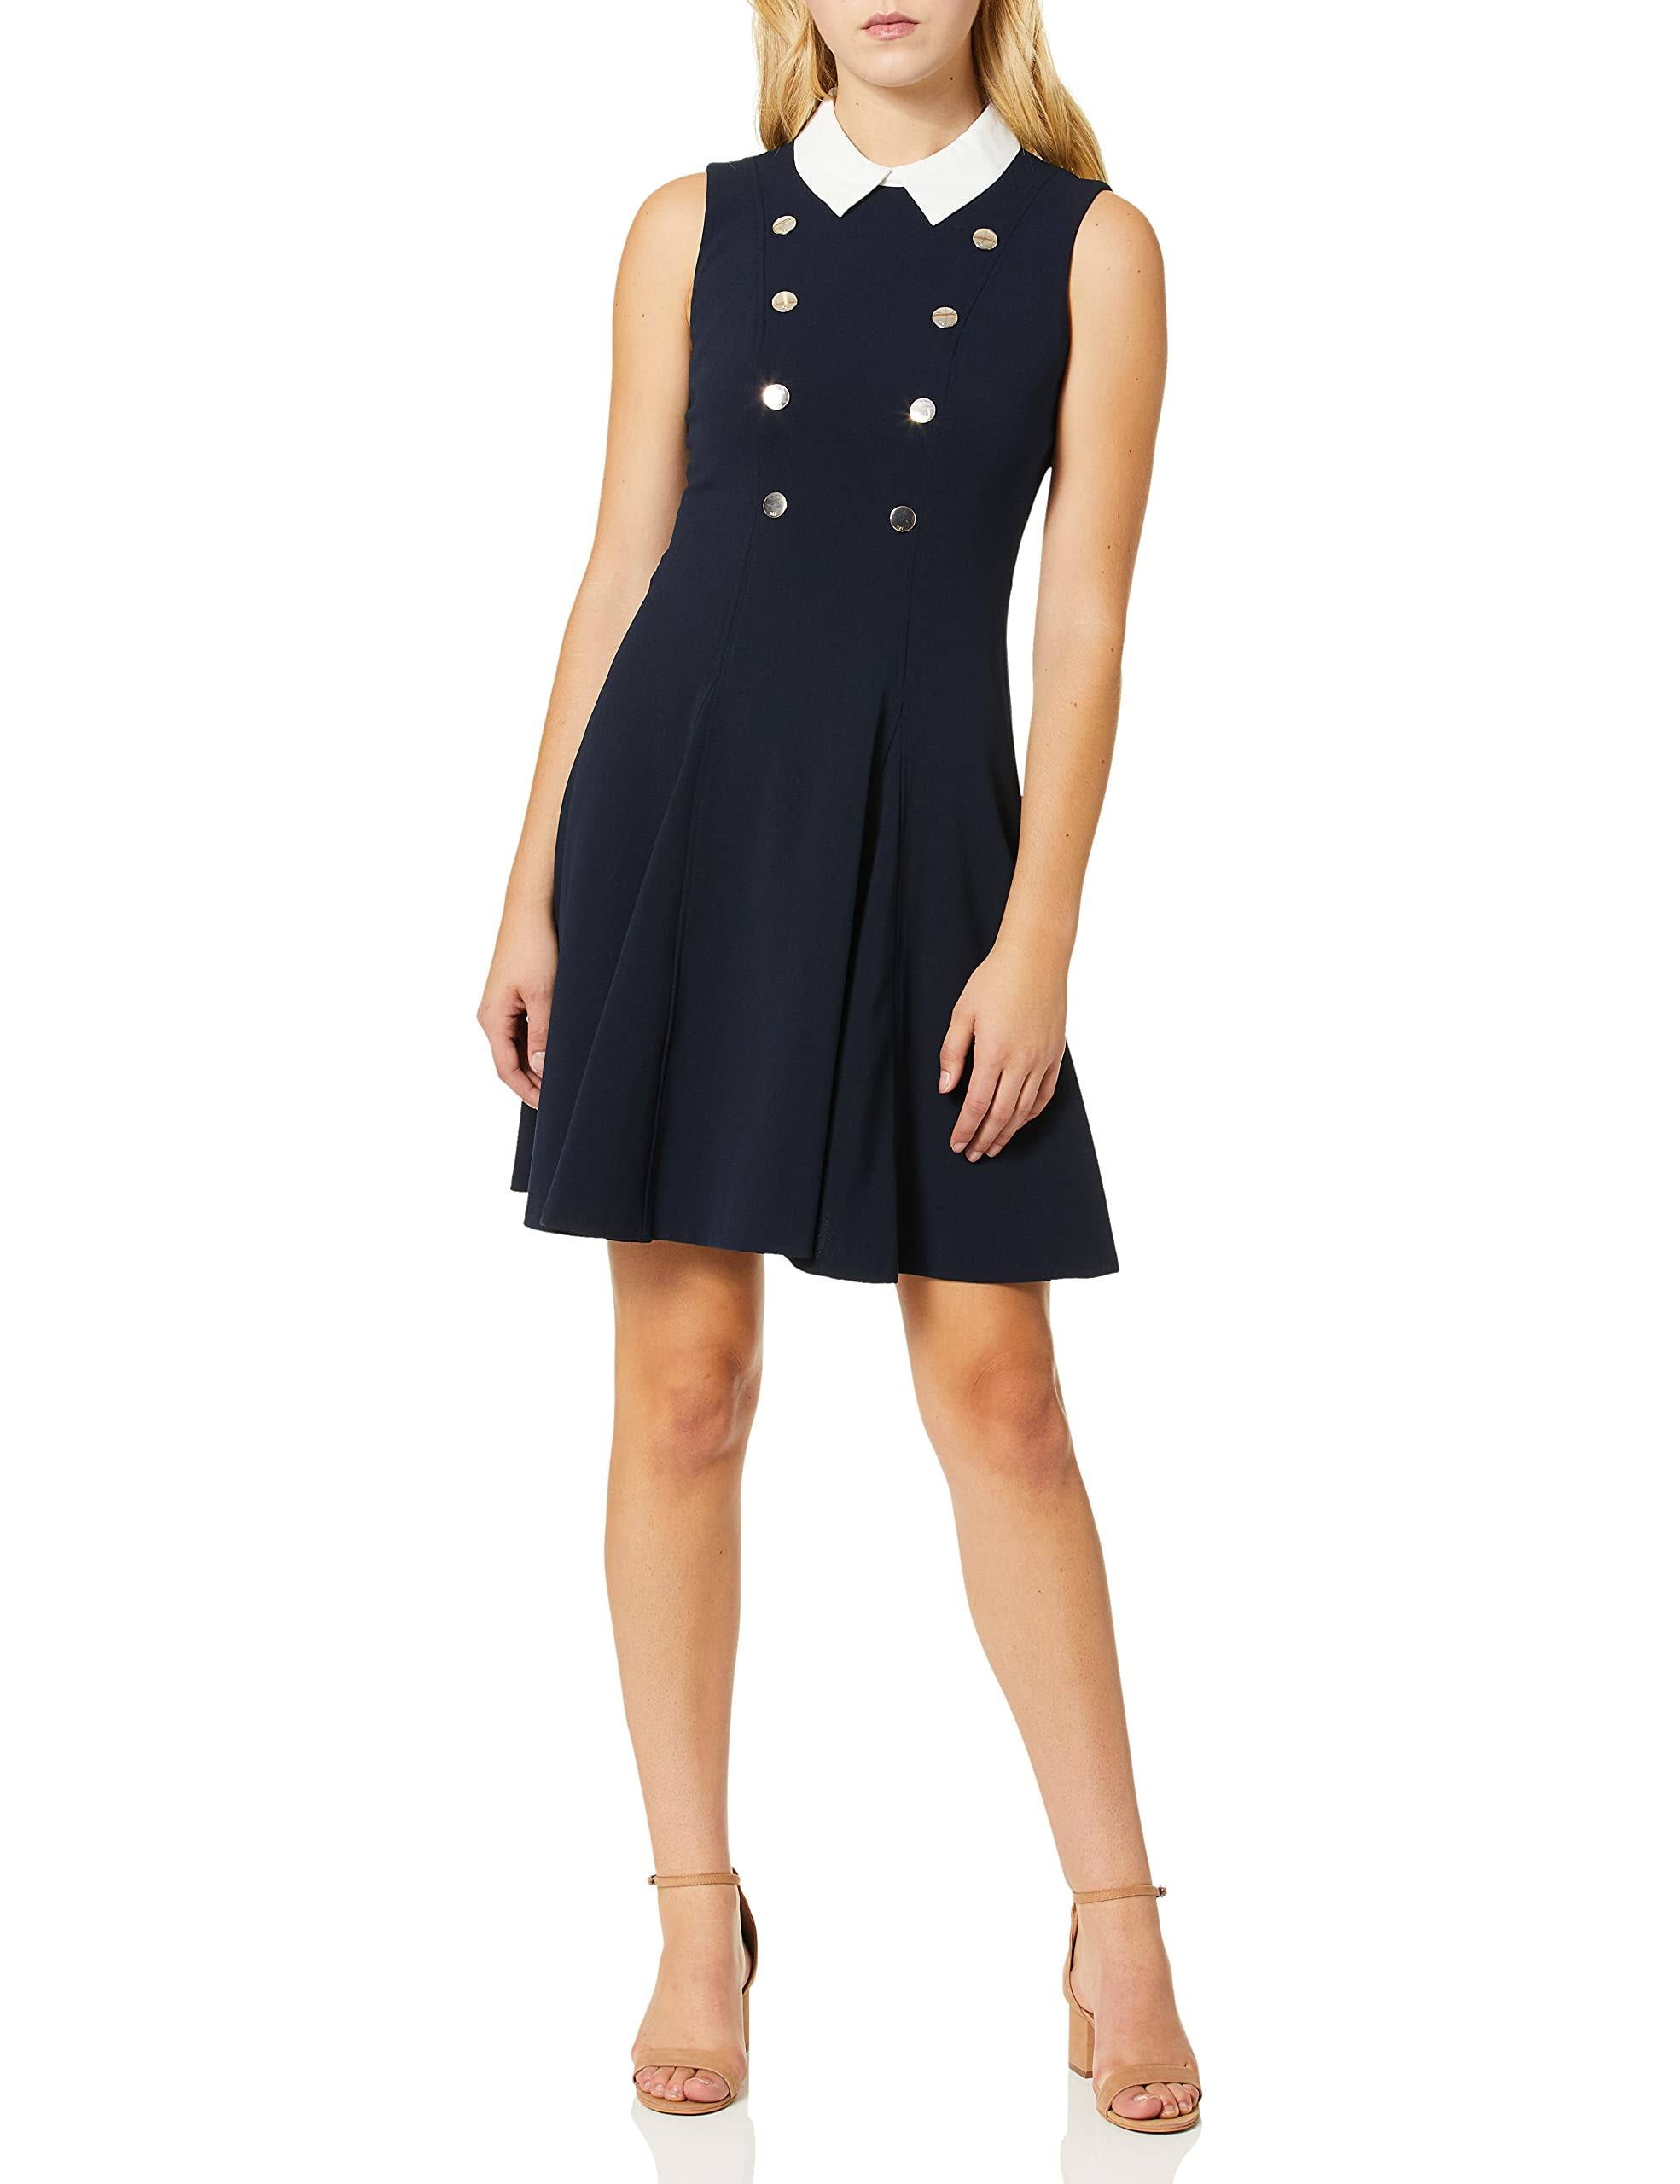 Tommy Hilfiger Party Dress: Fit & Flare Style with Contrast Collar | Image